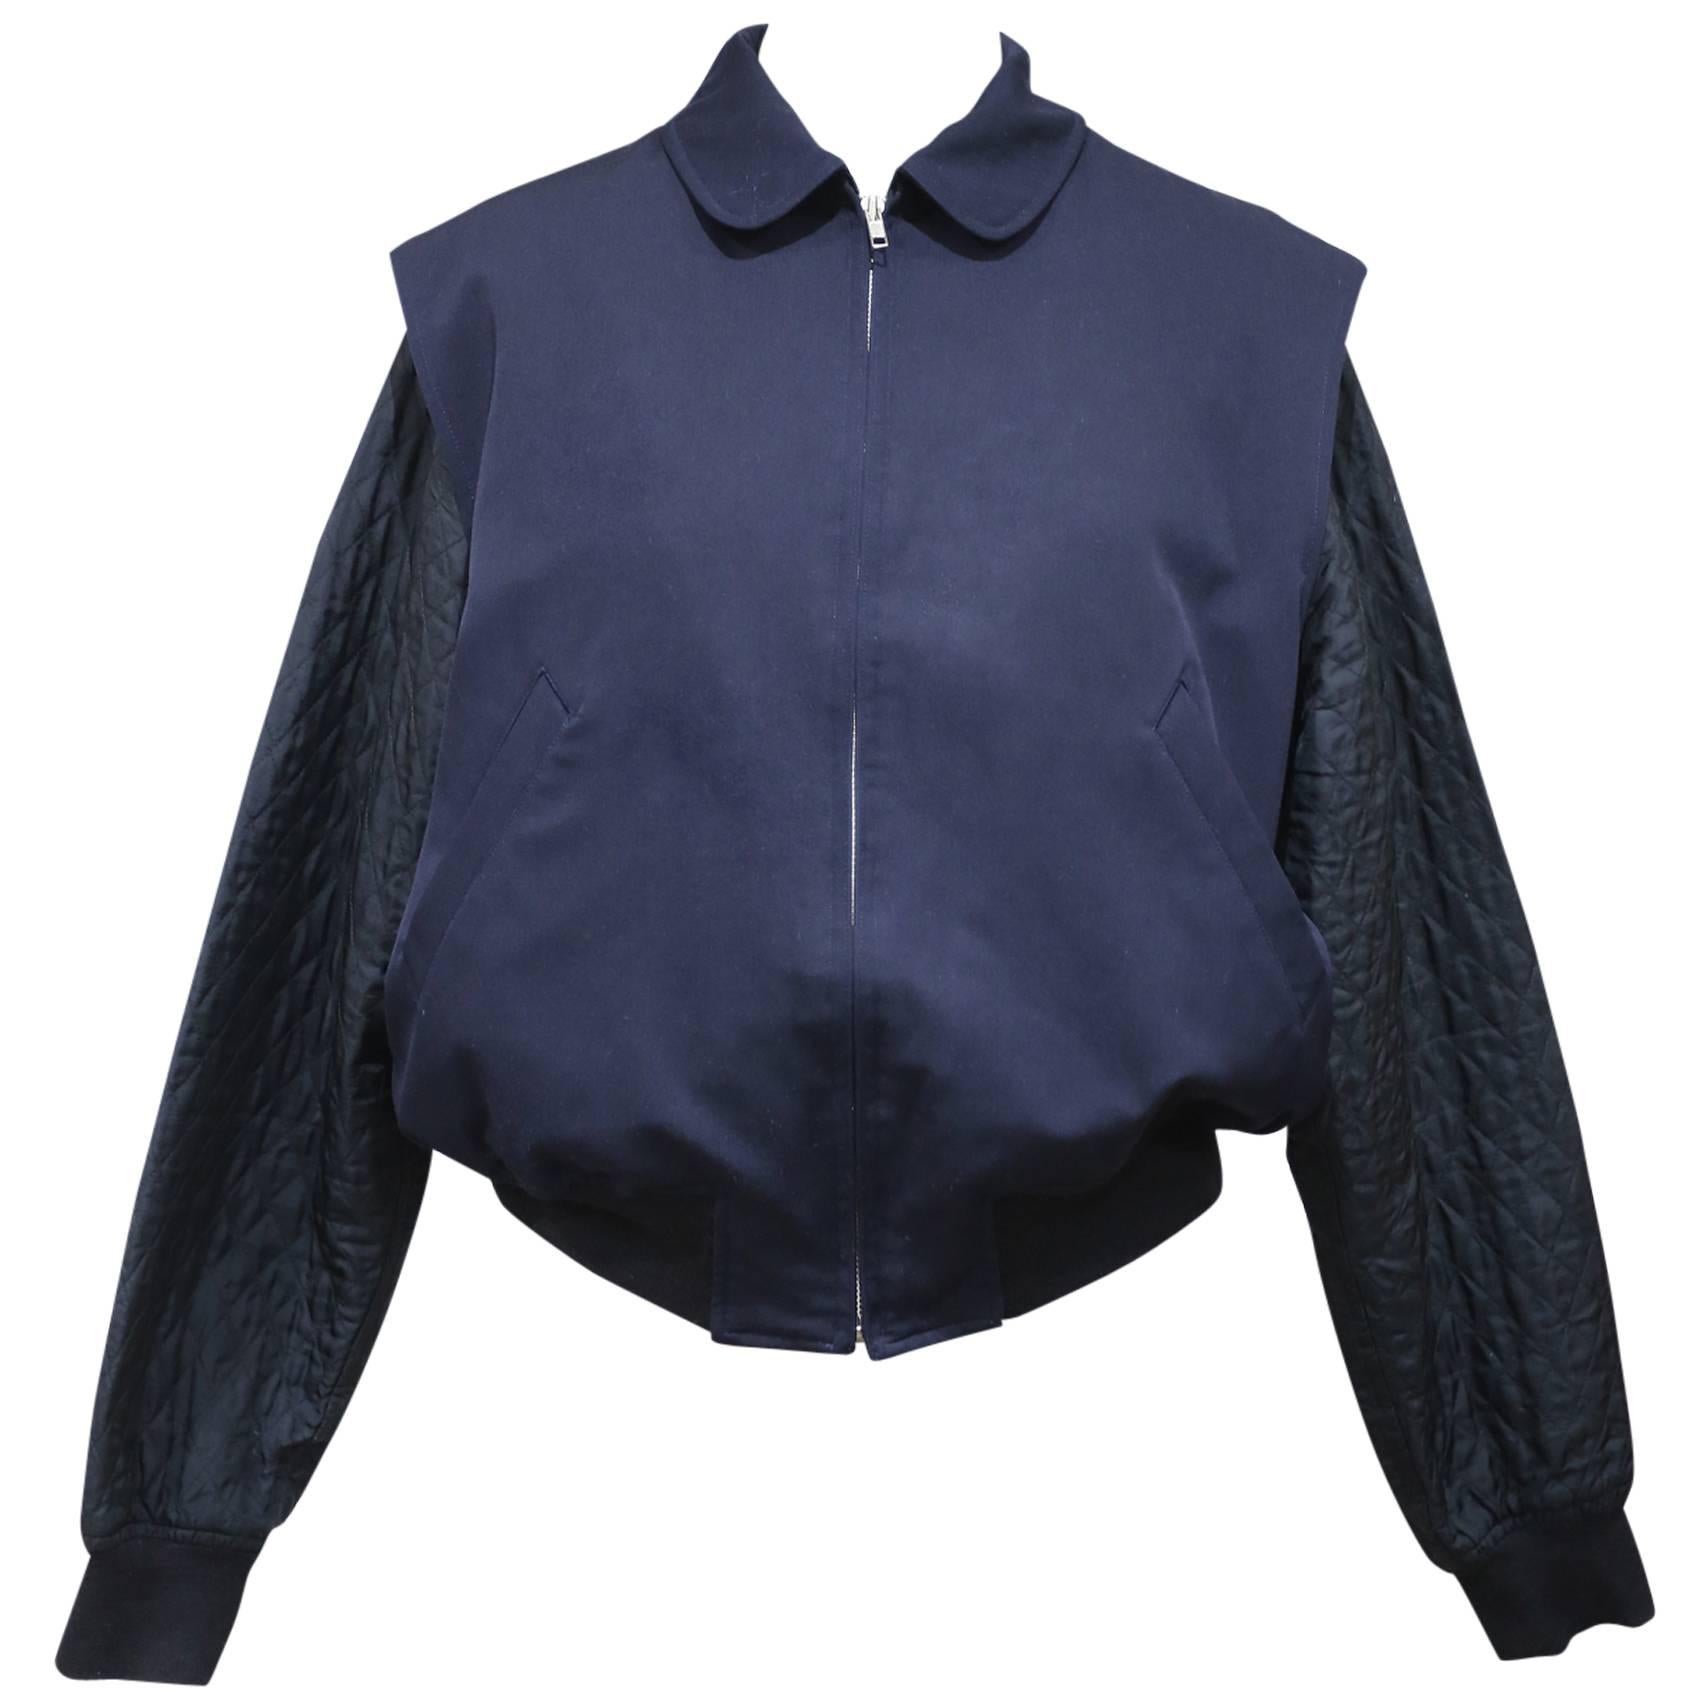 Comme des Garcons Homme navy cotton bomber jacket with quilted sleeves, c. 1989